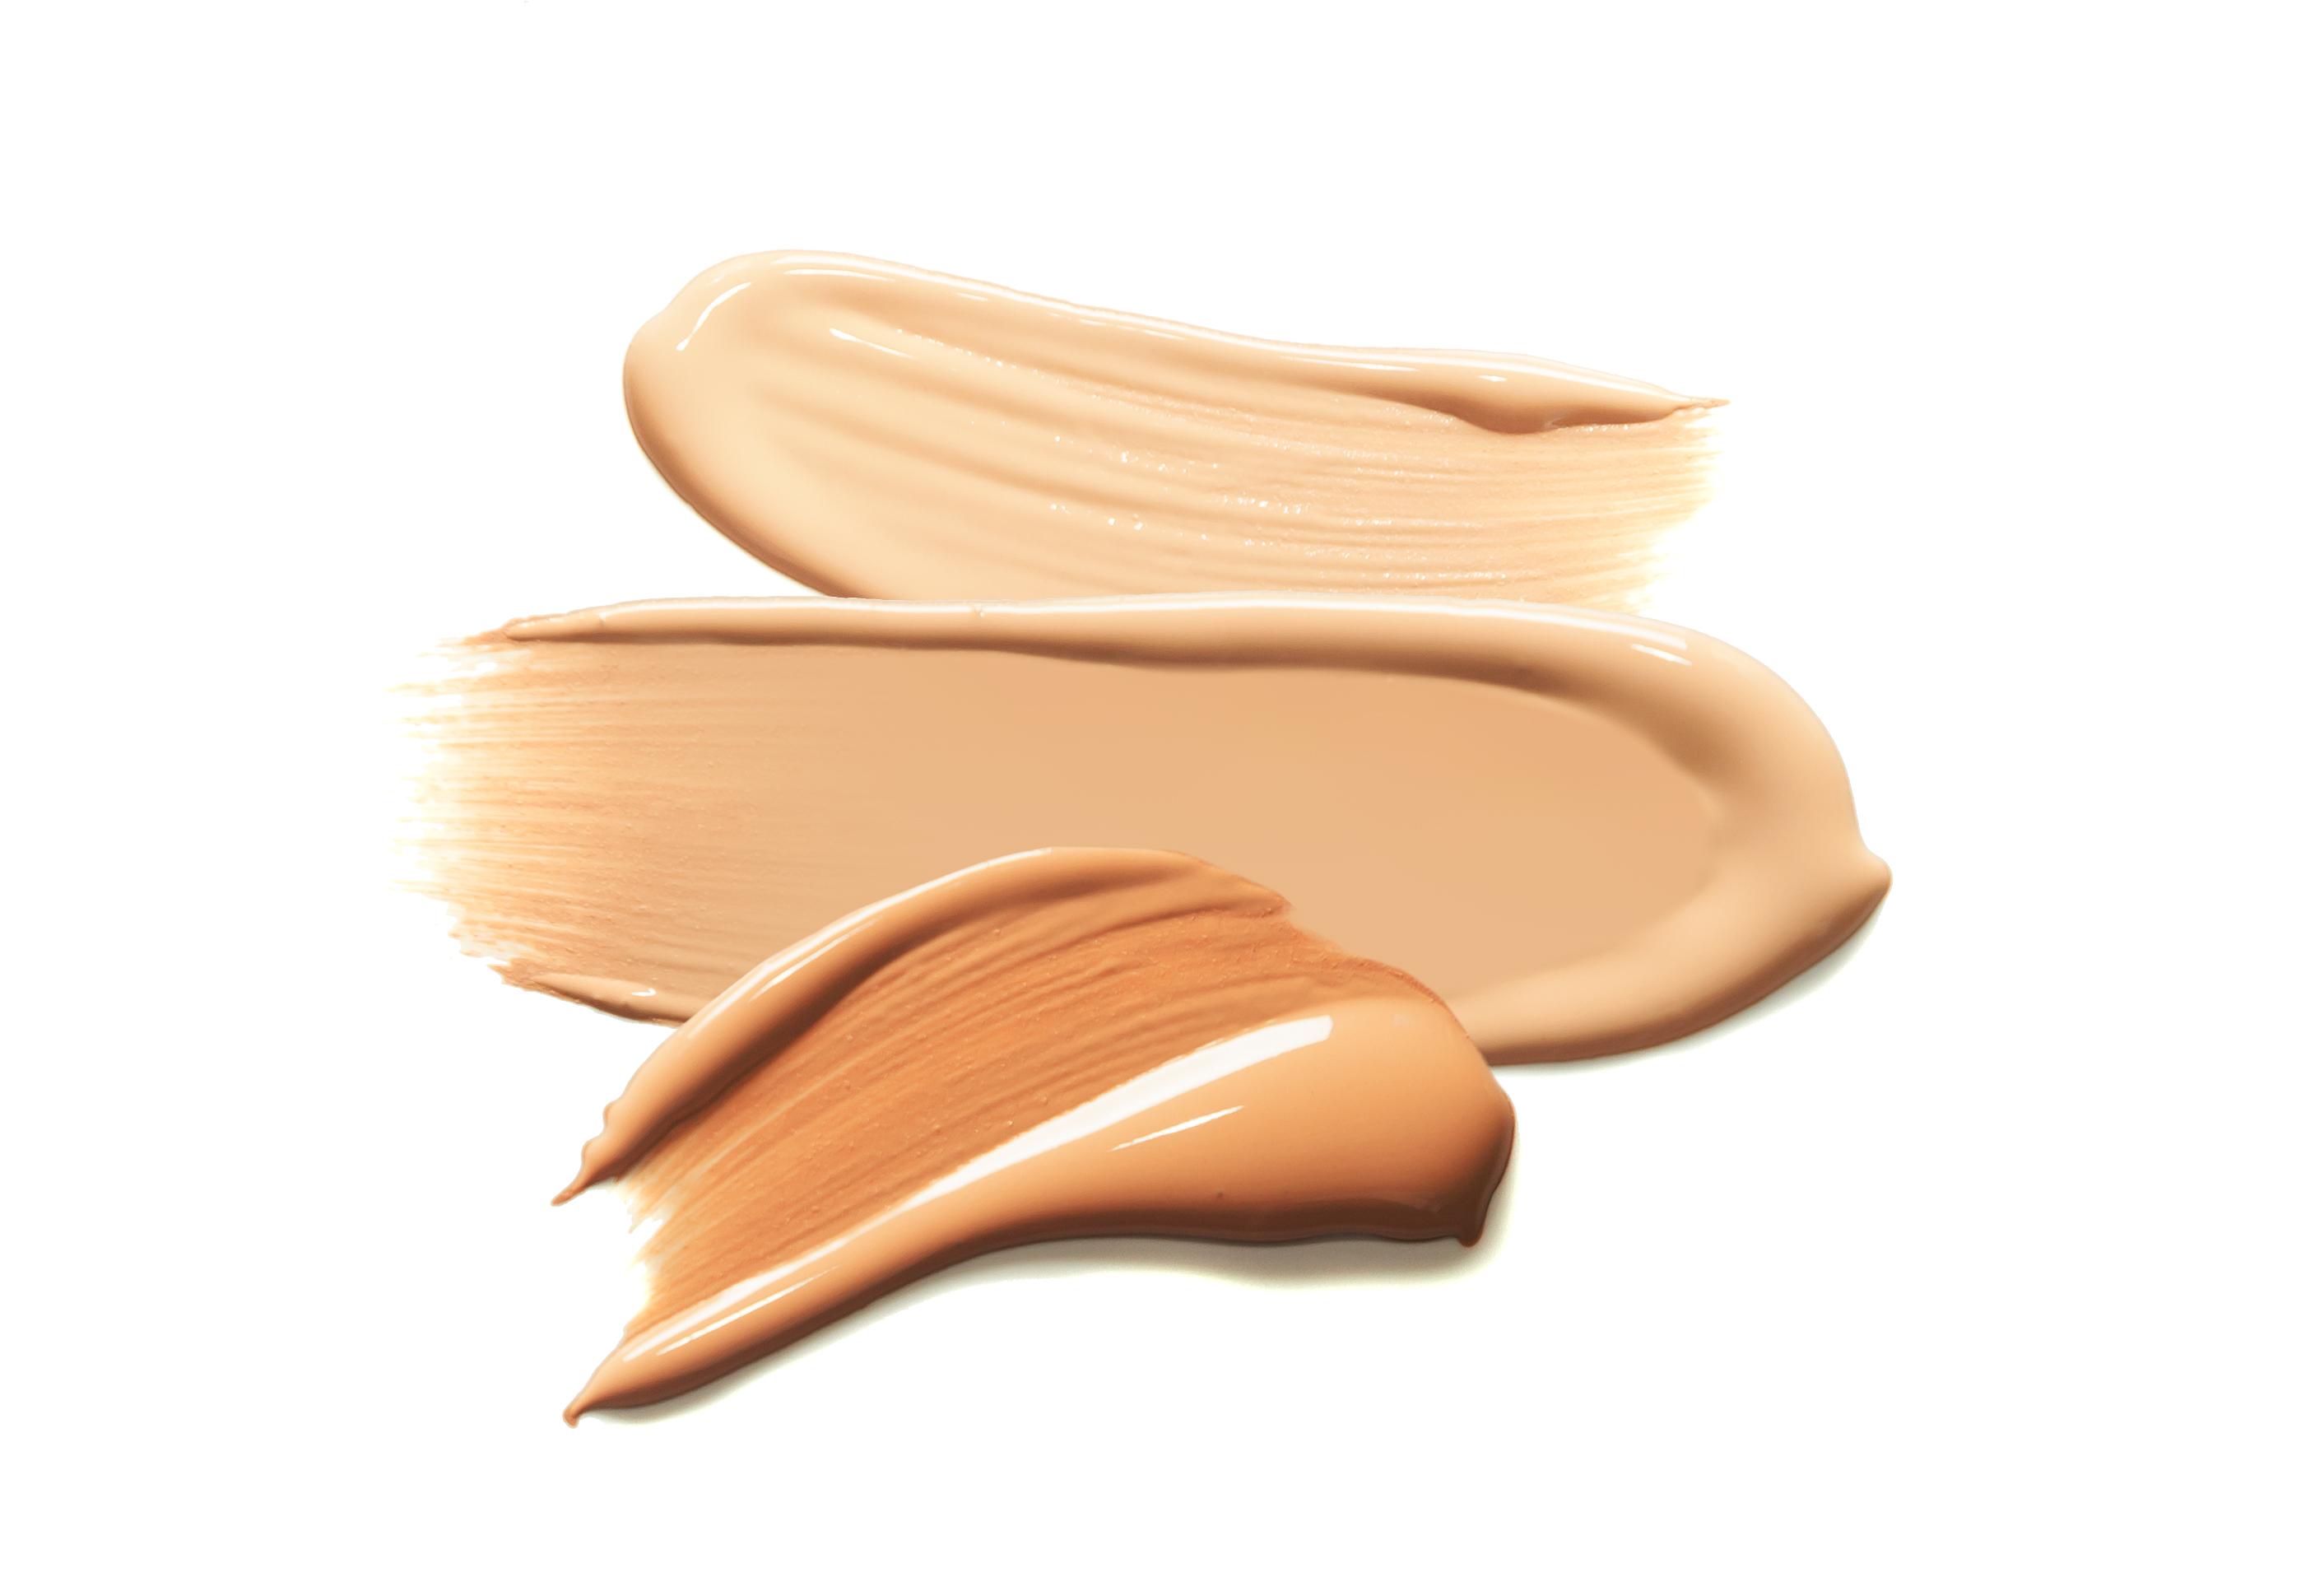 Foundation for contouring